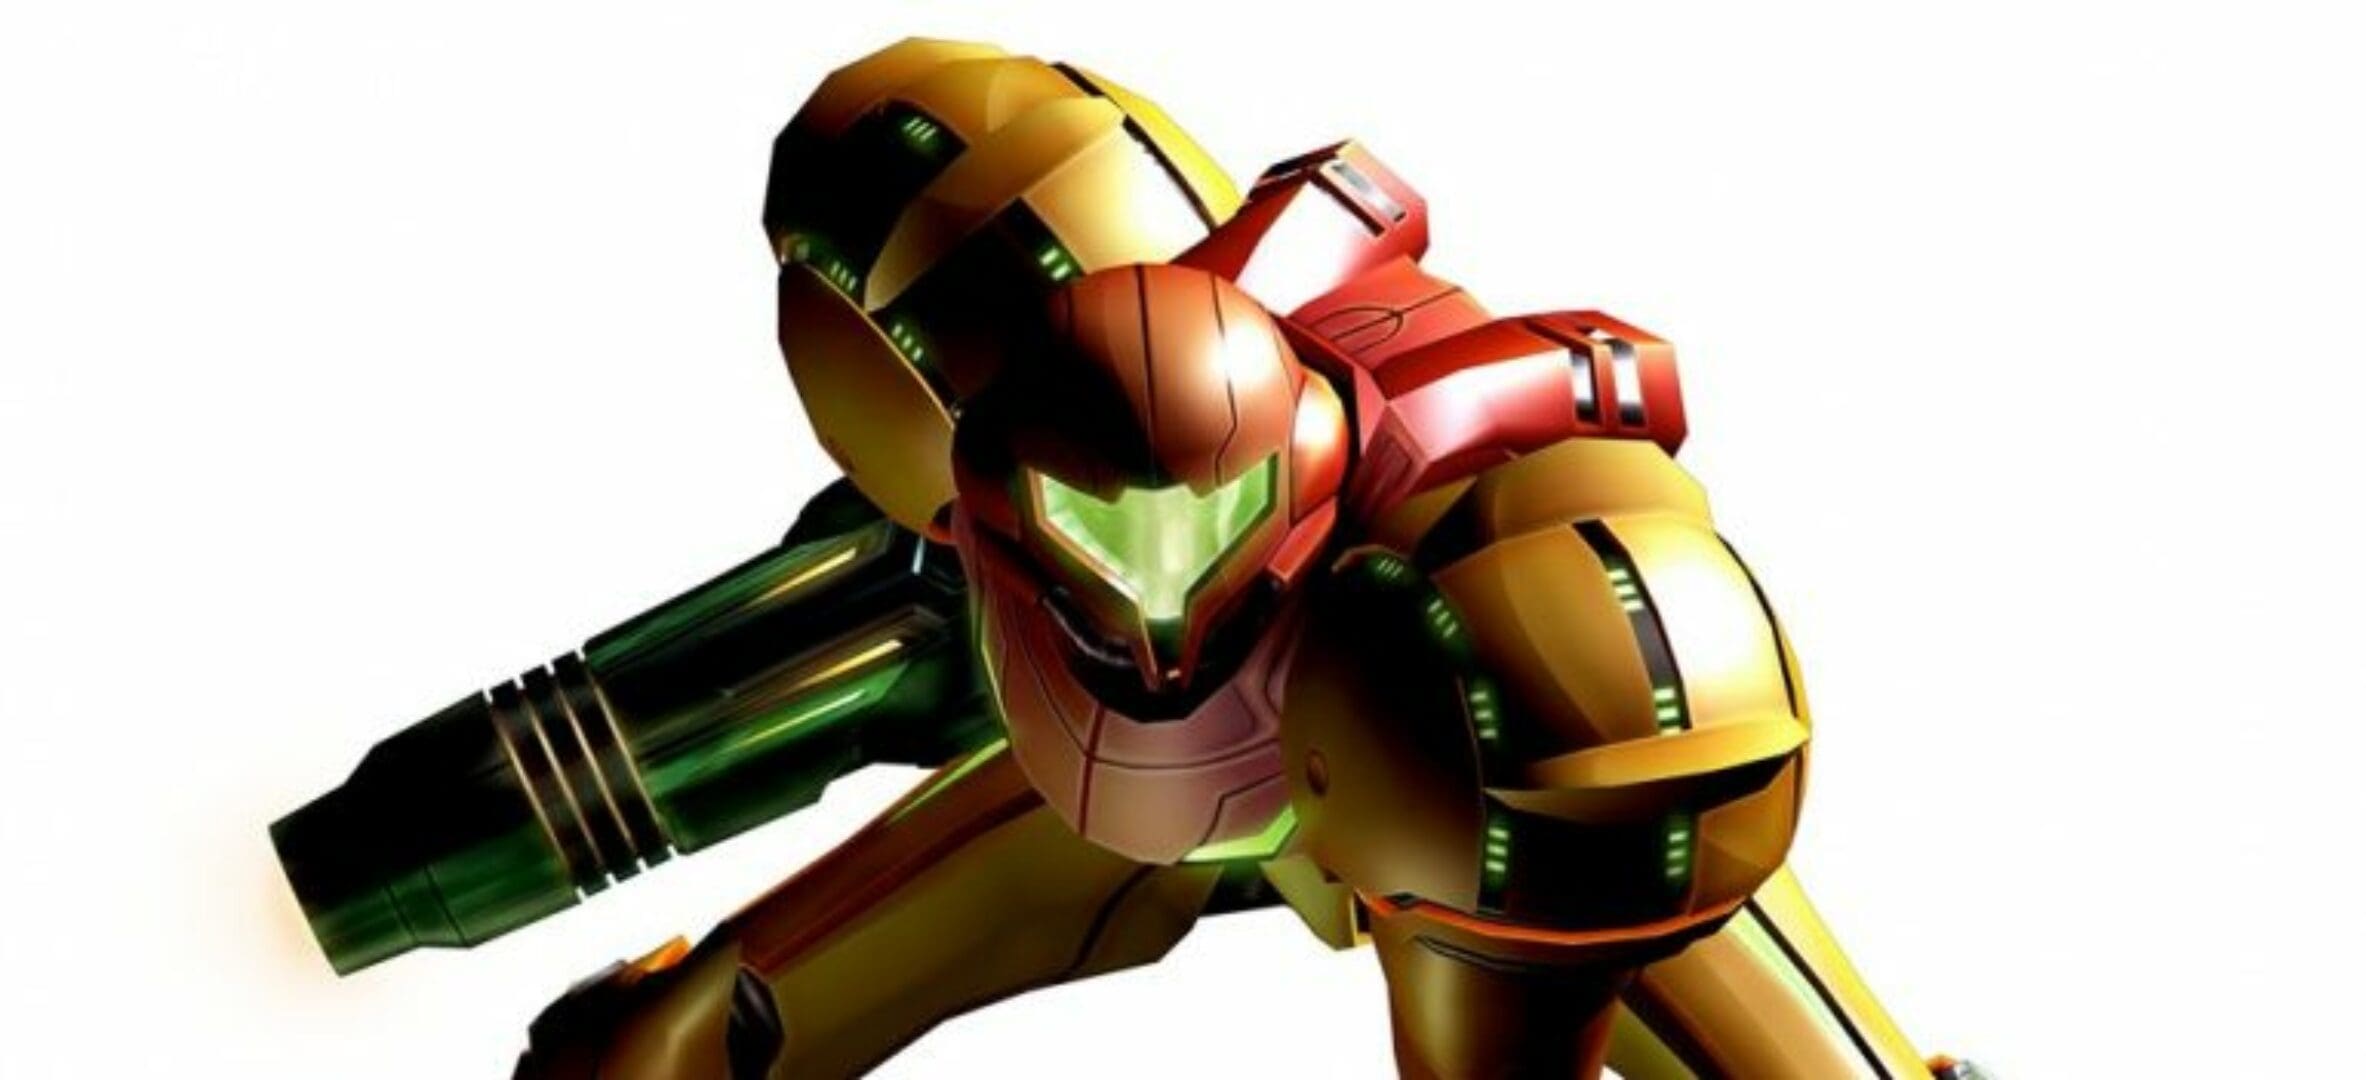 Metroid Prime 4 teaser featured